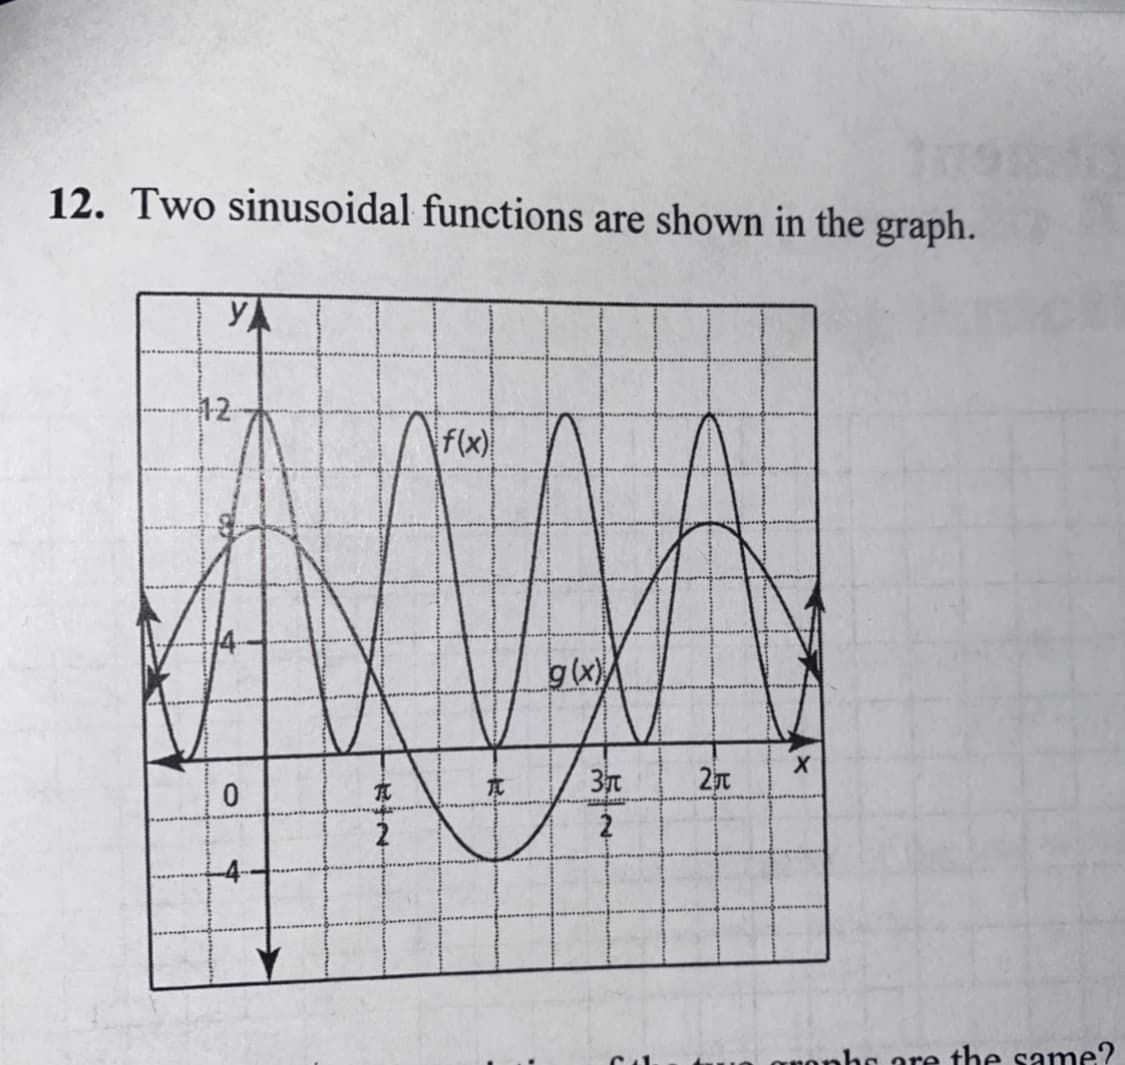 12. Two sinusoidal functions are shown in the graph.
YA
12-
f(x)
g(x)/
3元
0 ore the same?
.瓦中2
